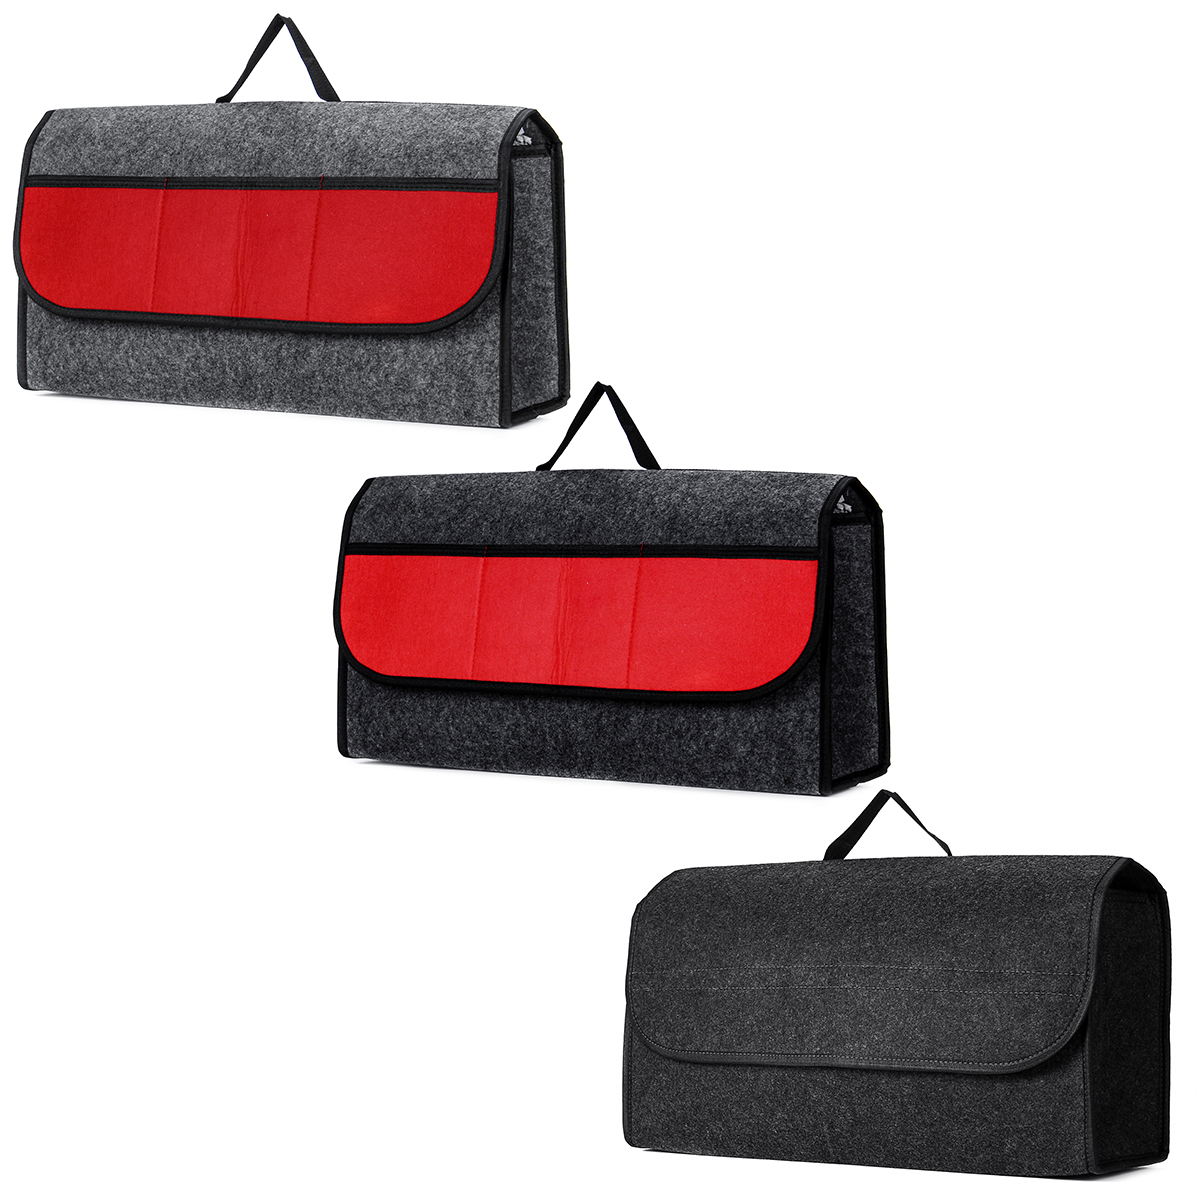 

Organizer Collapsible Foldable Tool Storage Bag Compartments For Car Van Truck Trunk